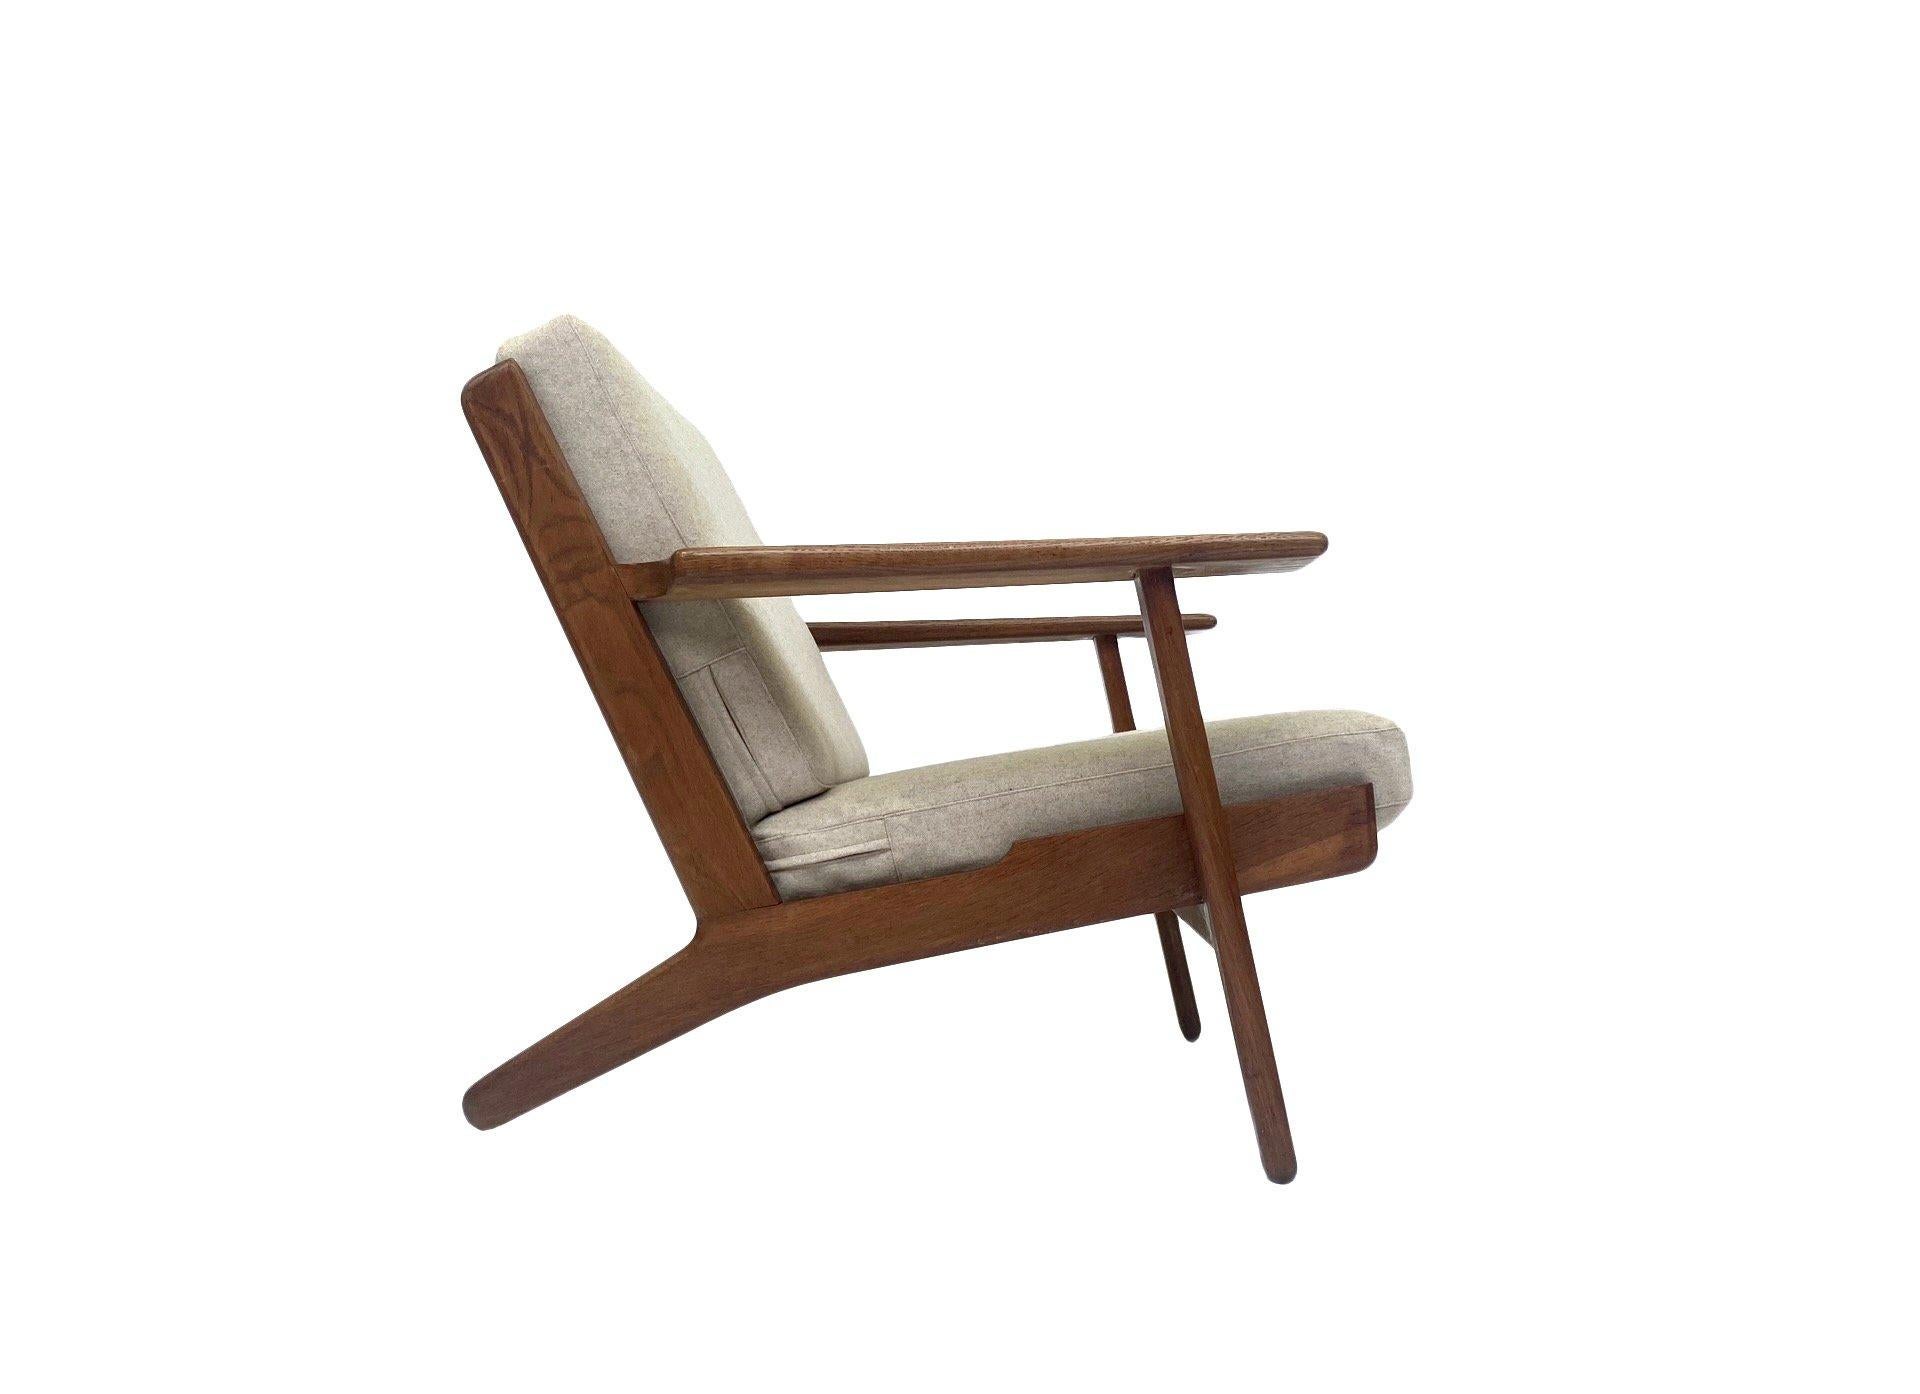 A beautiful Danish iconic Model GE-290 solid oak and cream wool lounge armchair designed by Hans J. Wegner for Getama in the 1950s, this would make a stylish addition to any living or work area. A striking piece of classic Scandinavian